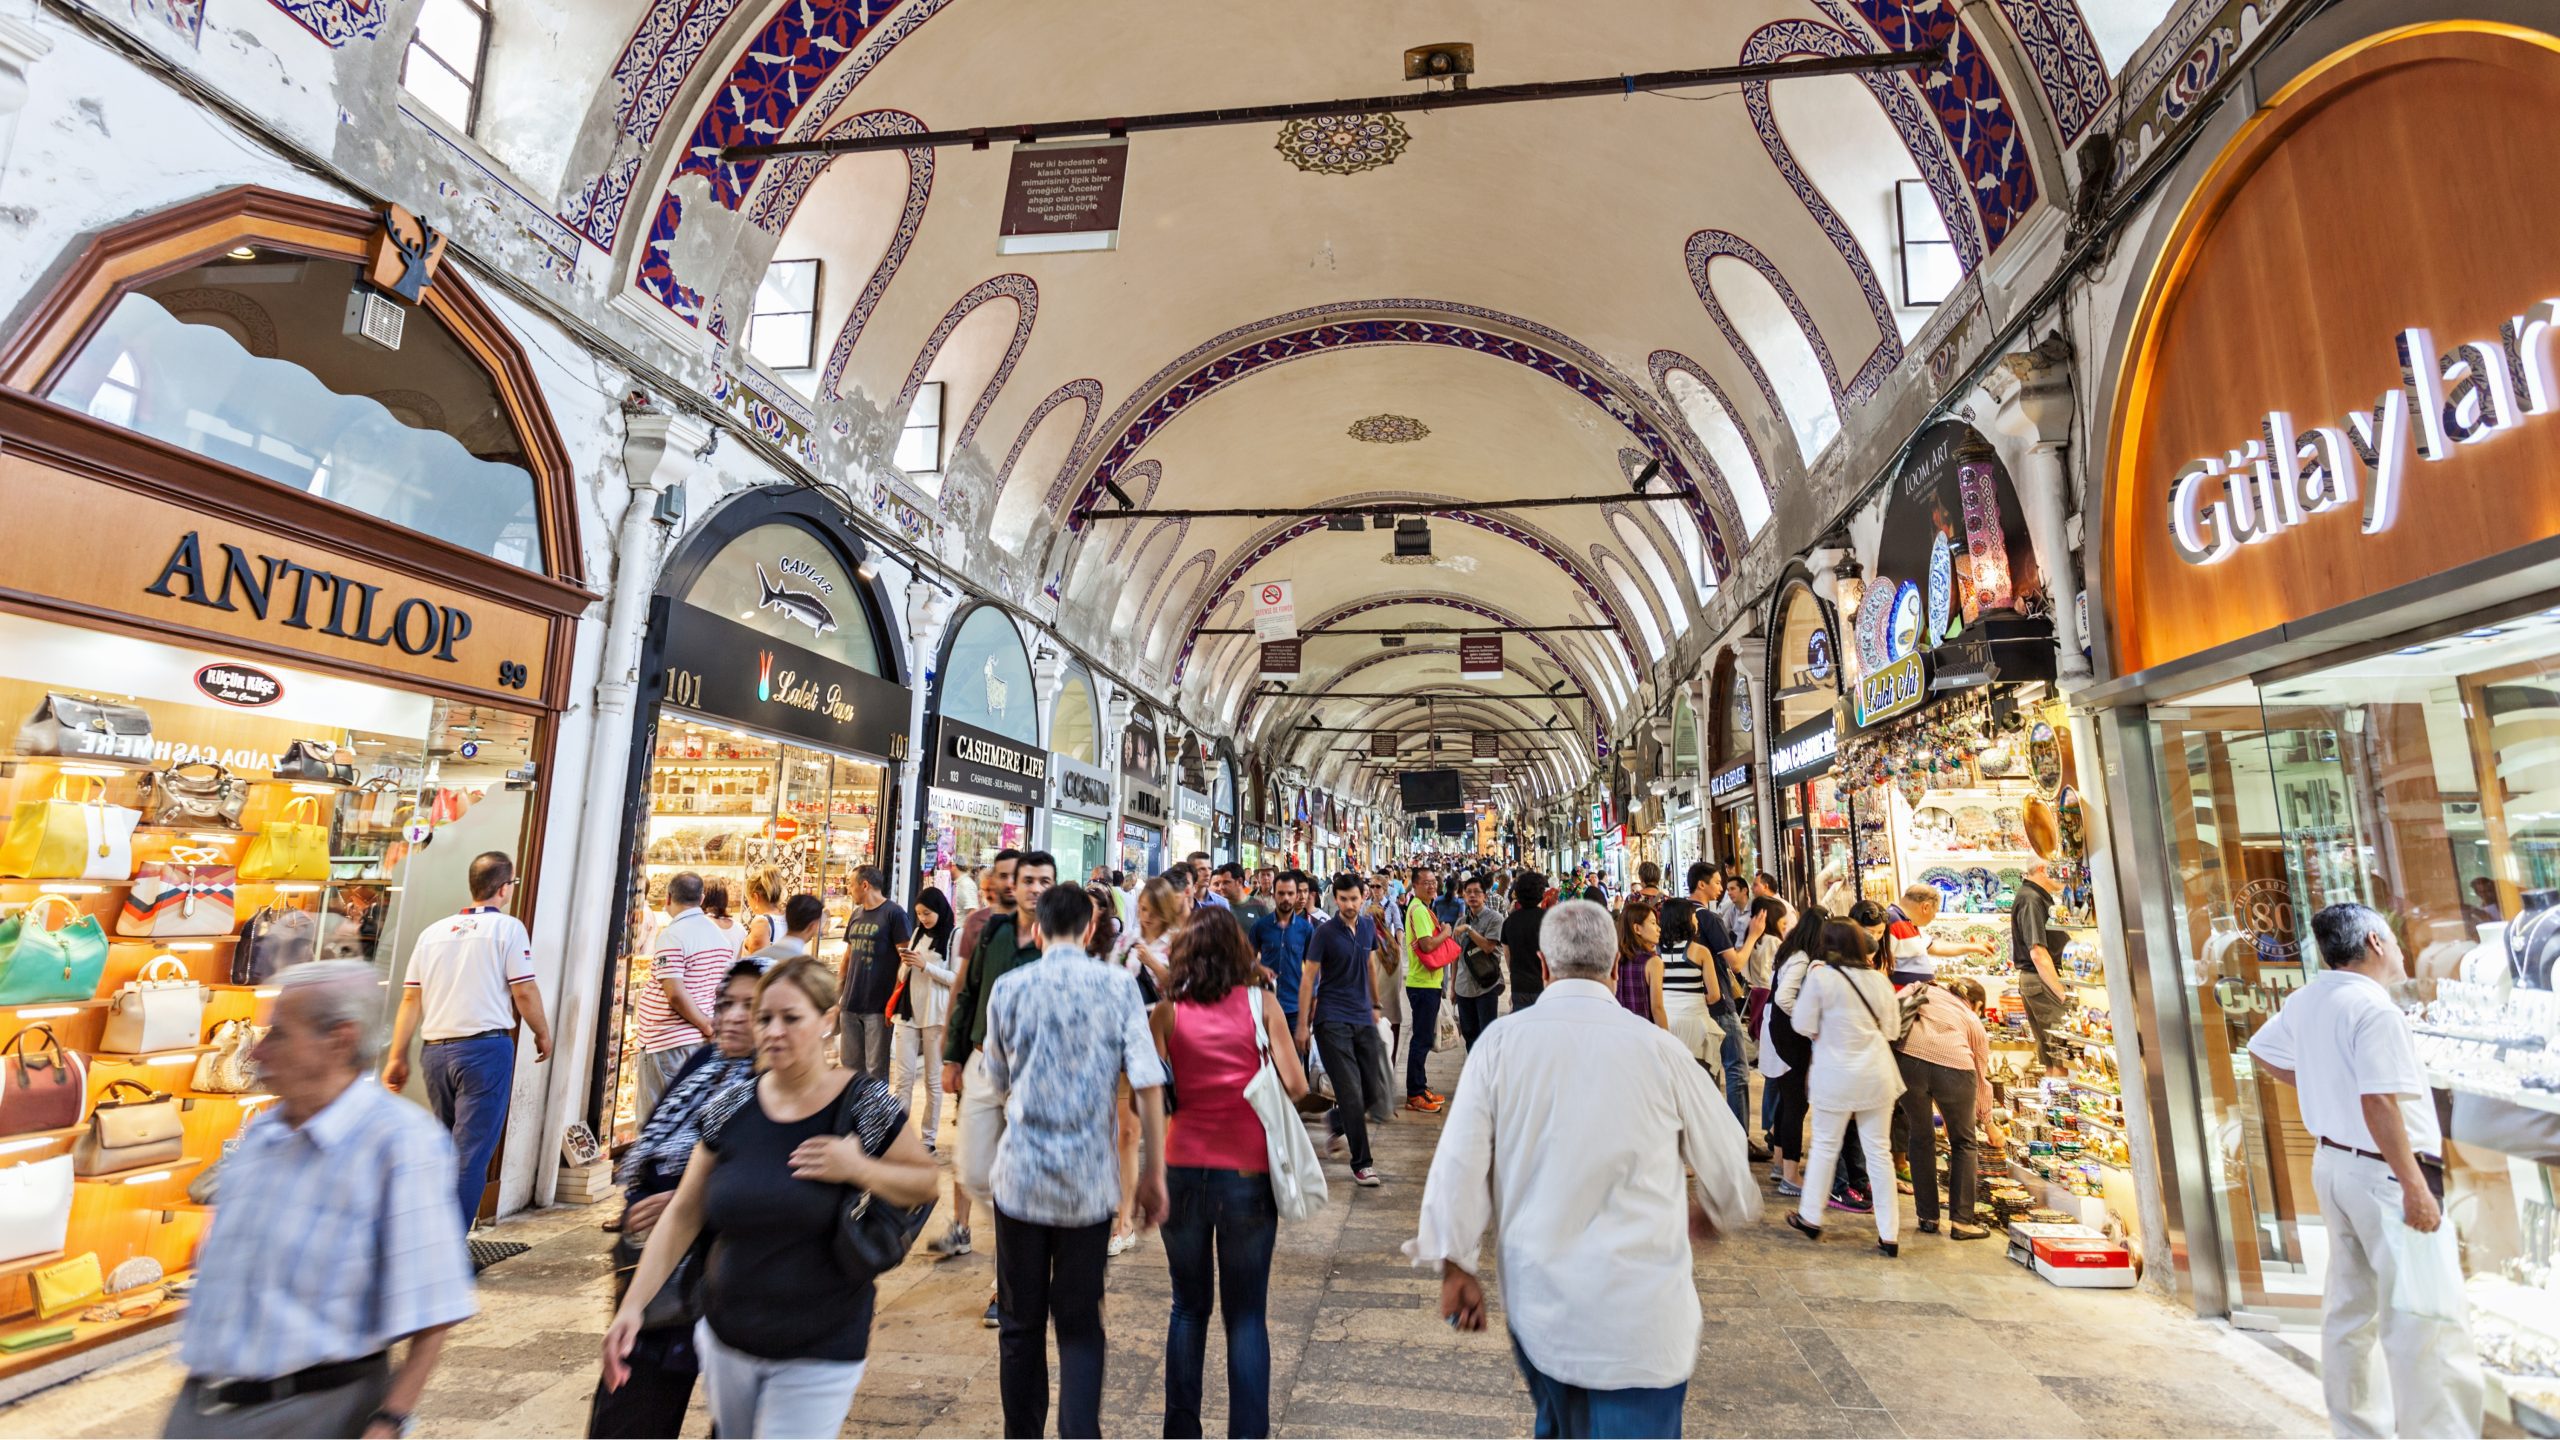 Visit the Grand Market Hall - the second thing in the 10 best things to do in Hungary